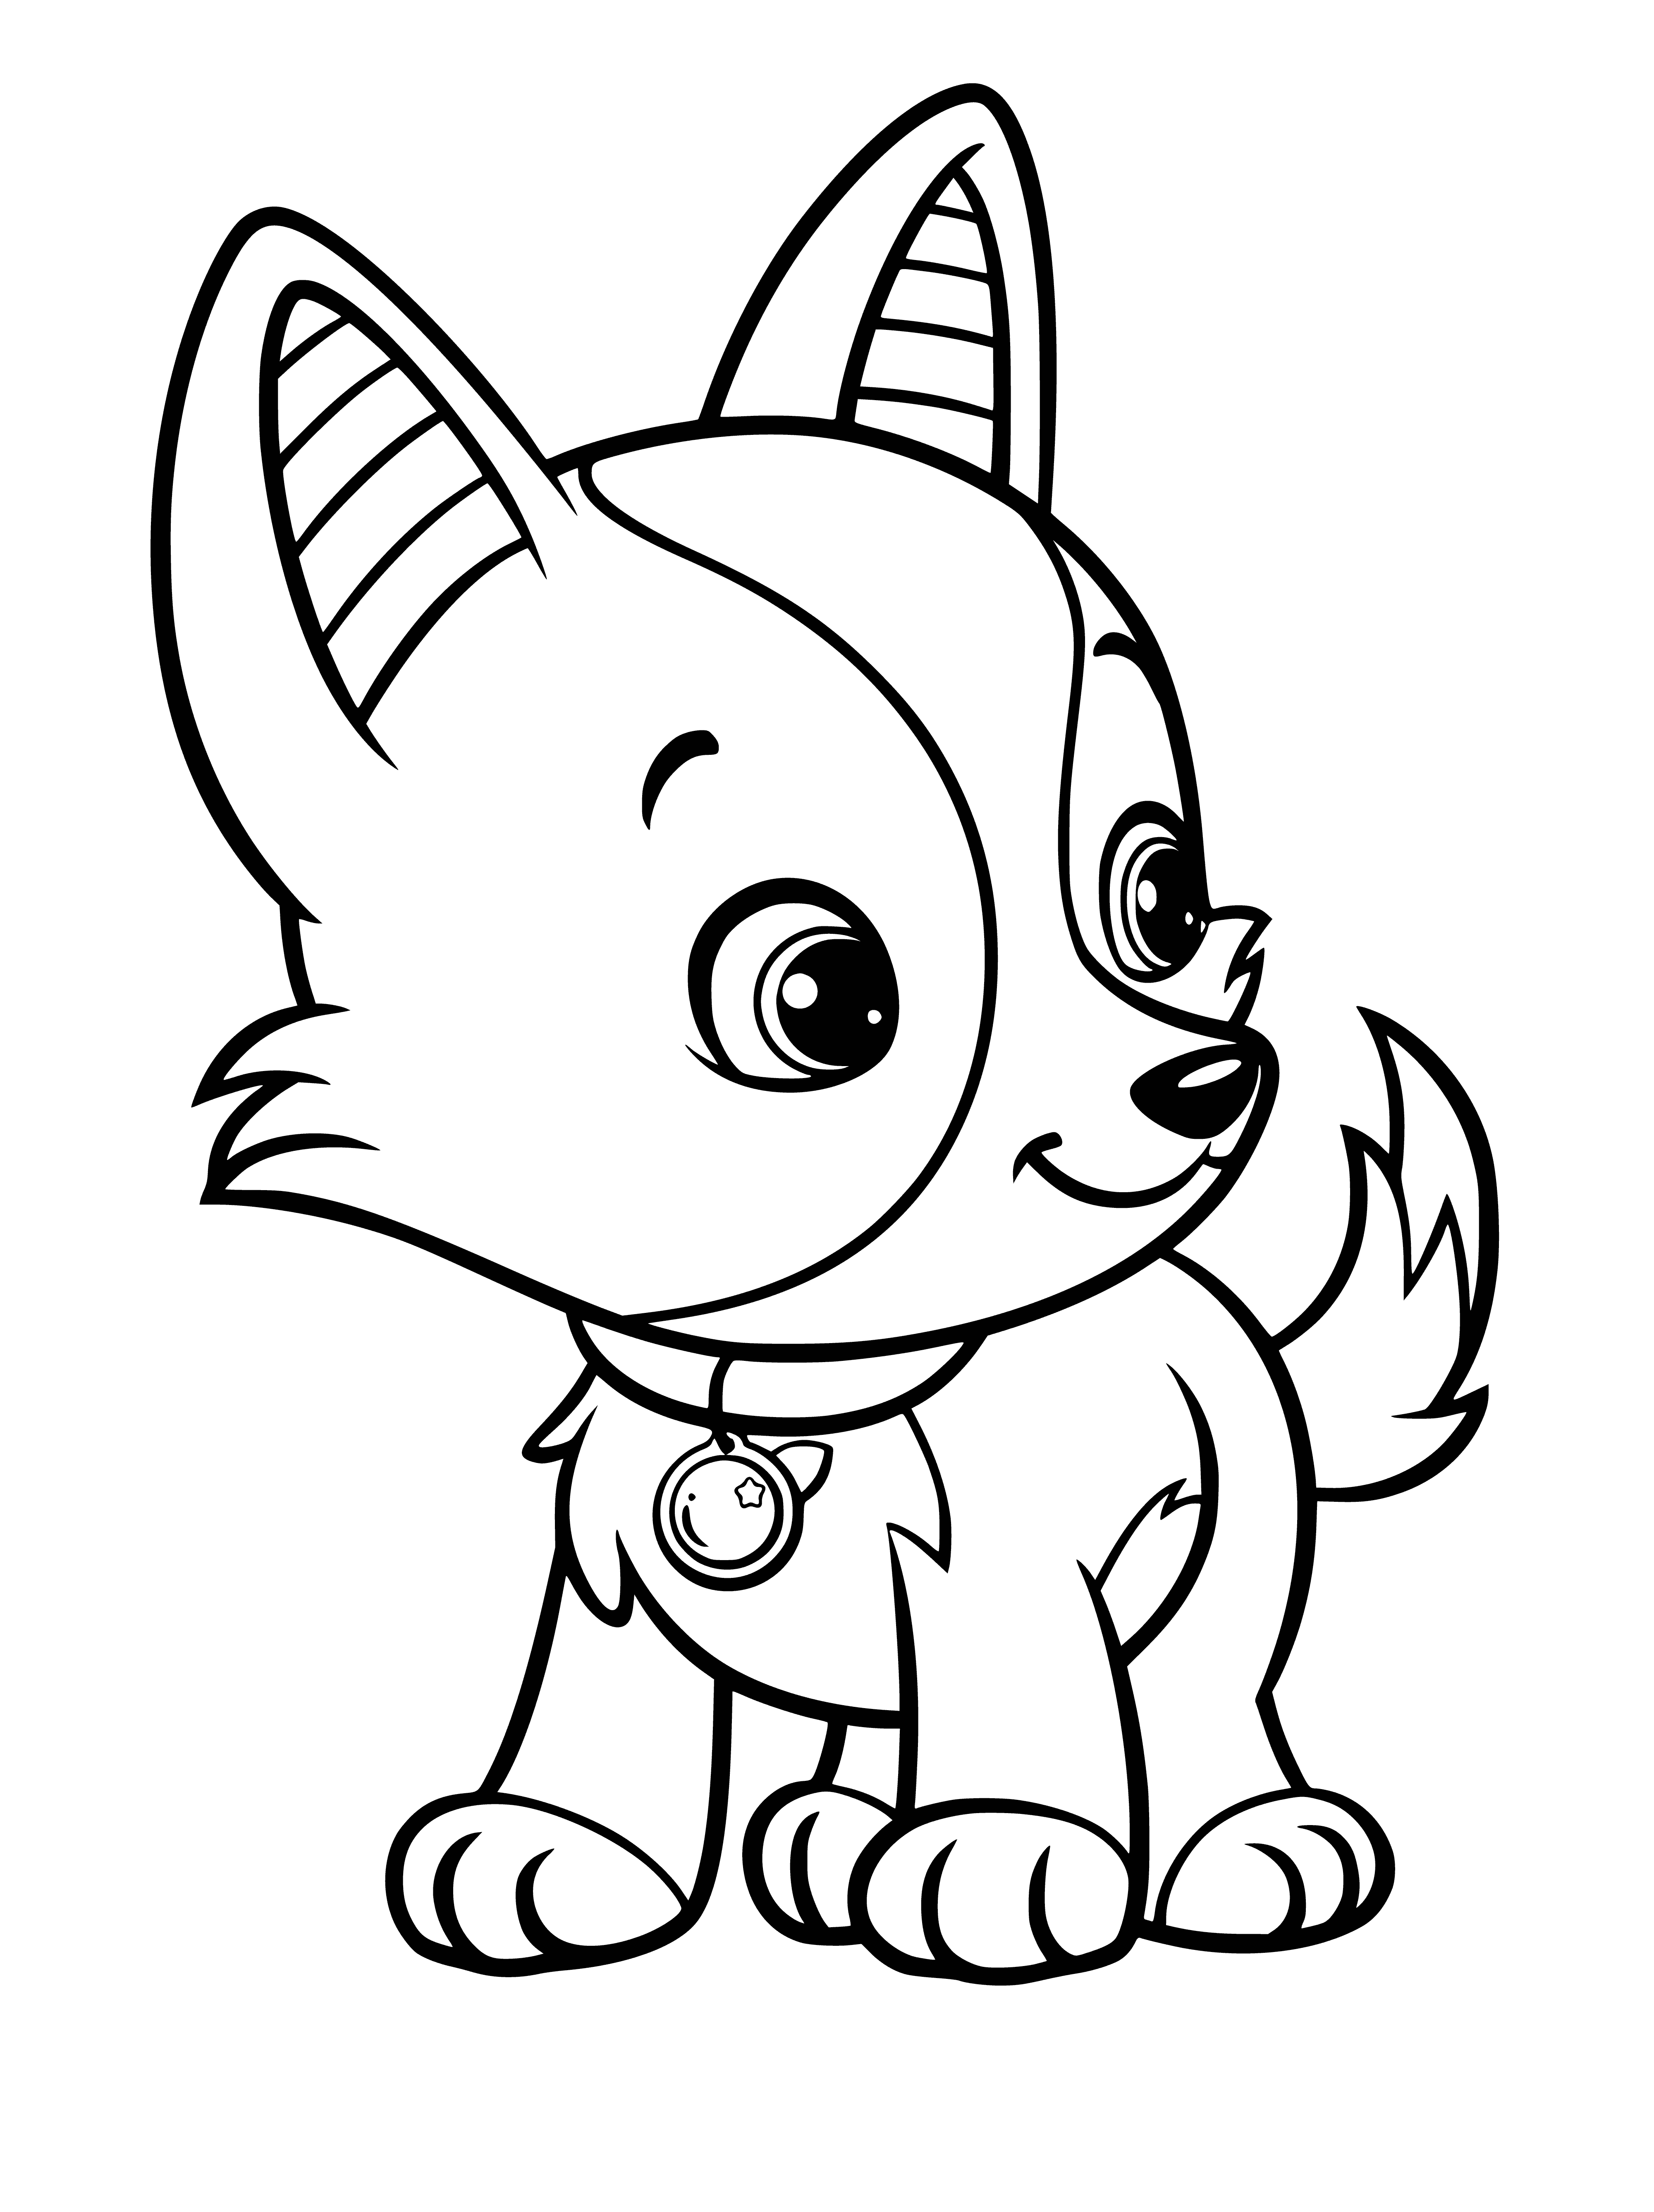 coloring page: A blueberry pet is a round, blue creature with a big head, two small eyes, a big mouth, and two small legs.